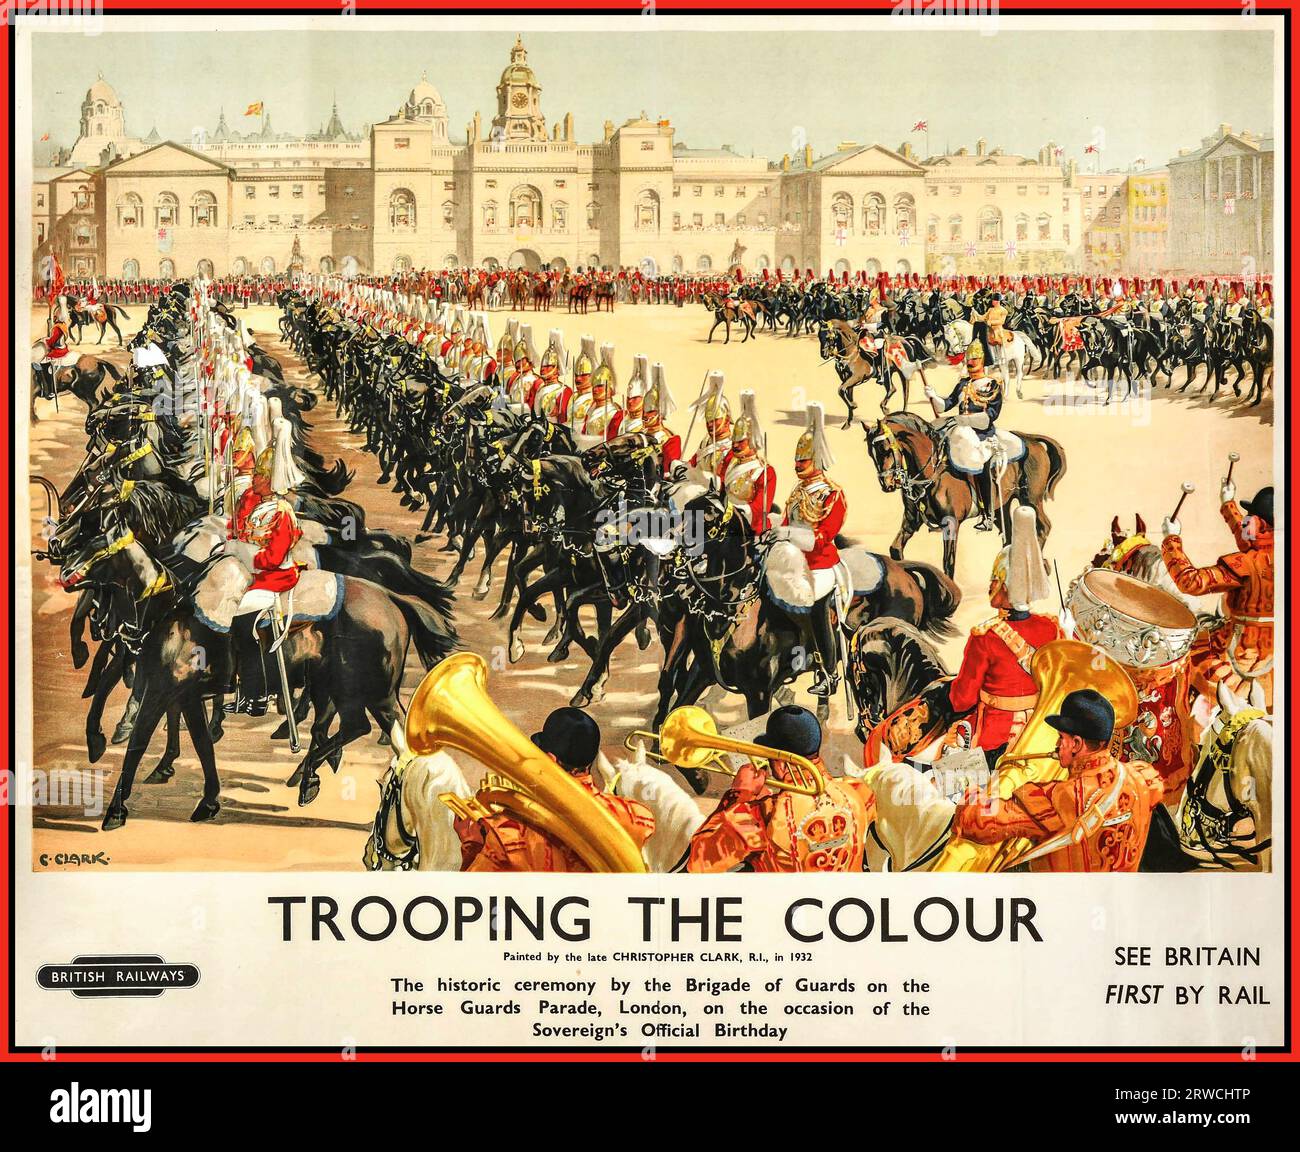 TROOPING THE COLOUR Vintage 1932 Poster featuring the historic ceremony at Horse Guards Parade of Brigade of Guards London on the occasion of the Sovereign’s official birthday. The Sovereign's birthday is officially celebrated by the ceremony of Trooping the Colour (King's Birthday Parade). This impressive display of pageantry takes place on a Saturday in June by his personal troops, the Household Division, on Horse Guards Parade, with His Majesty the King himself attending and taking the salute. British Rail 1930s Travel Poster by Artist Christopher Clark Stock Photo